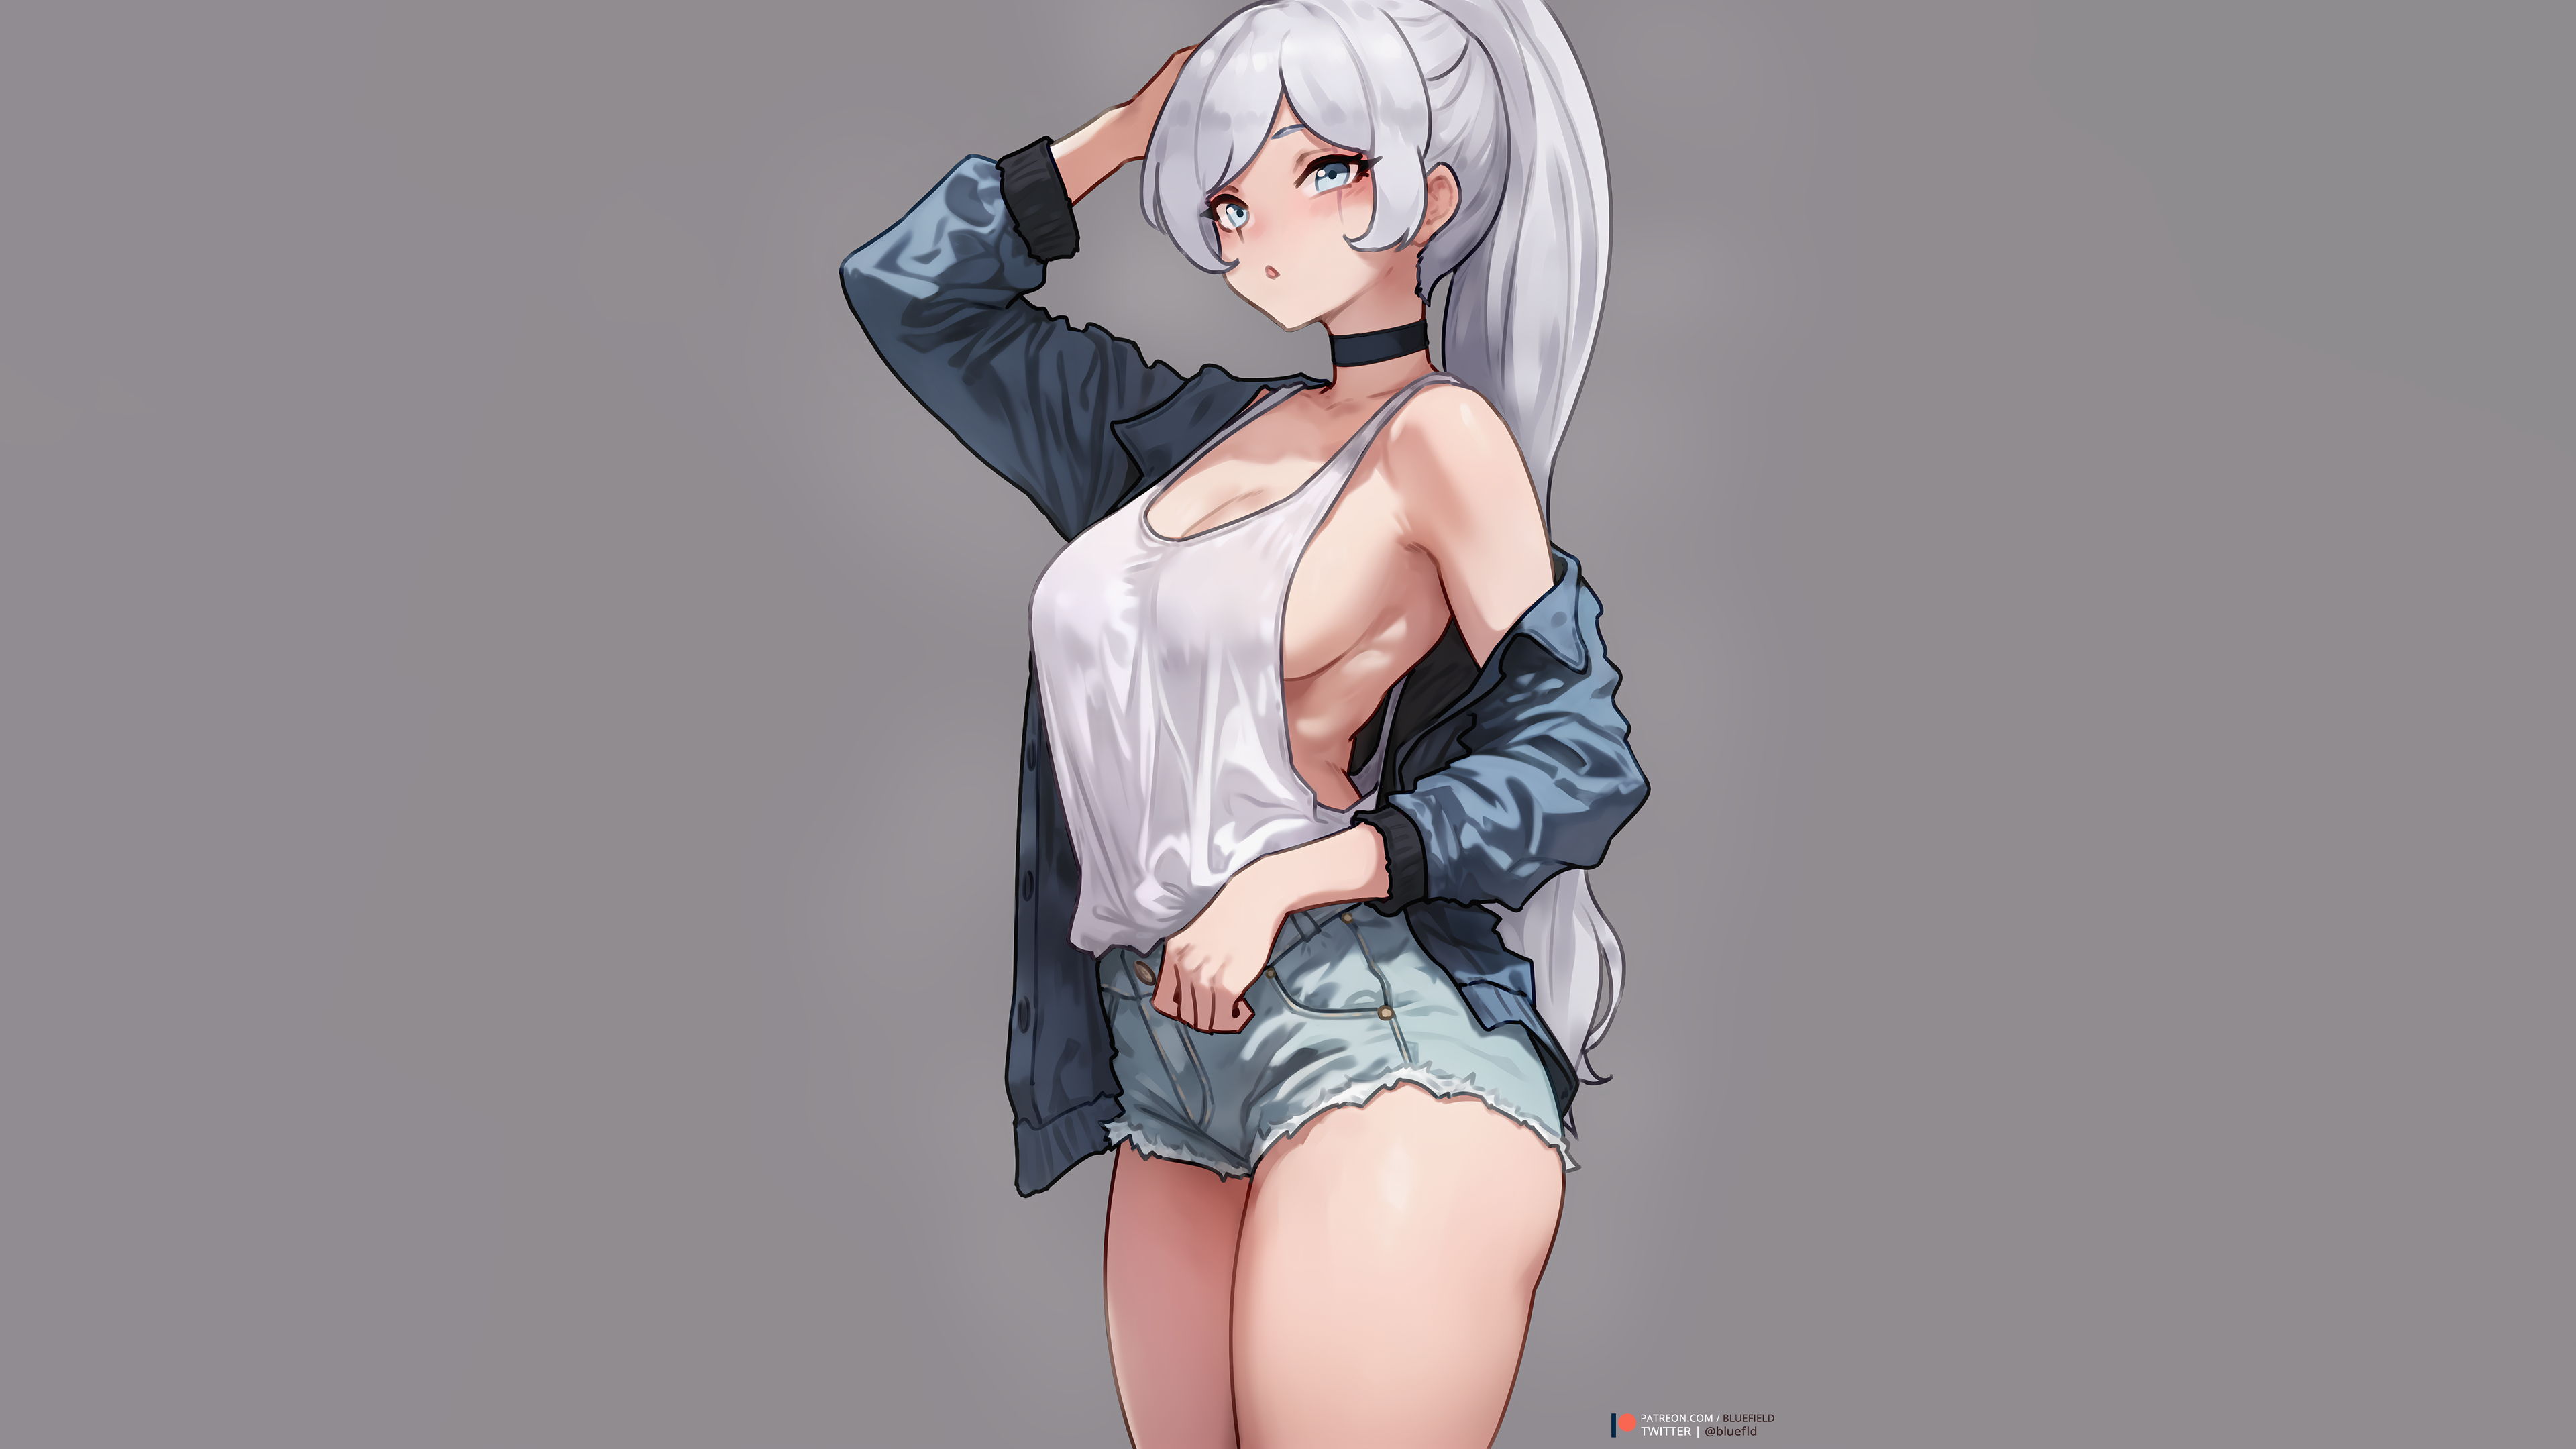 Anime 3840x2160 Weiss Schnee RWBY bluefield white hair long hair ponytail blue eyes choker loose clothing white tops sideboob boobs jean shorts short shorts blue jacket white eyebrows thighs looking at viewer simple background gray background watermarked artwork digital art fan art 2D anime anime girls